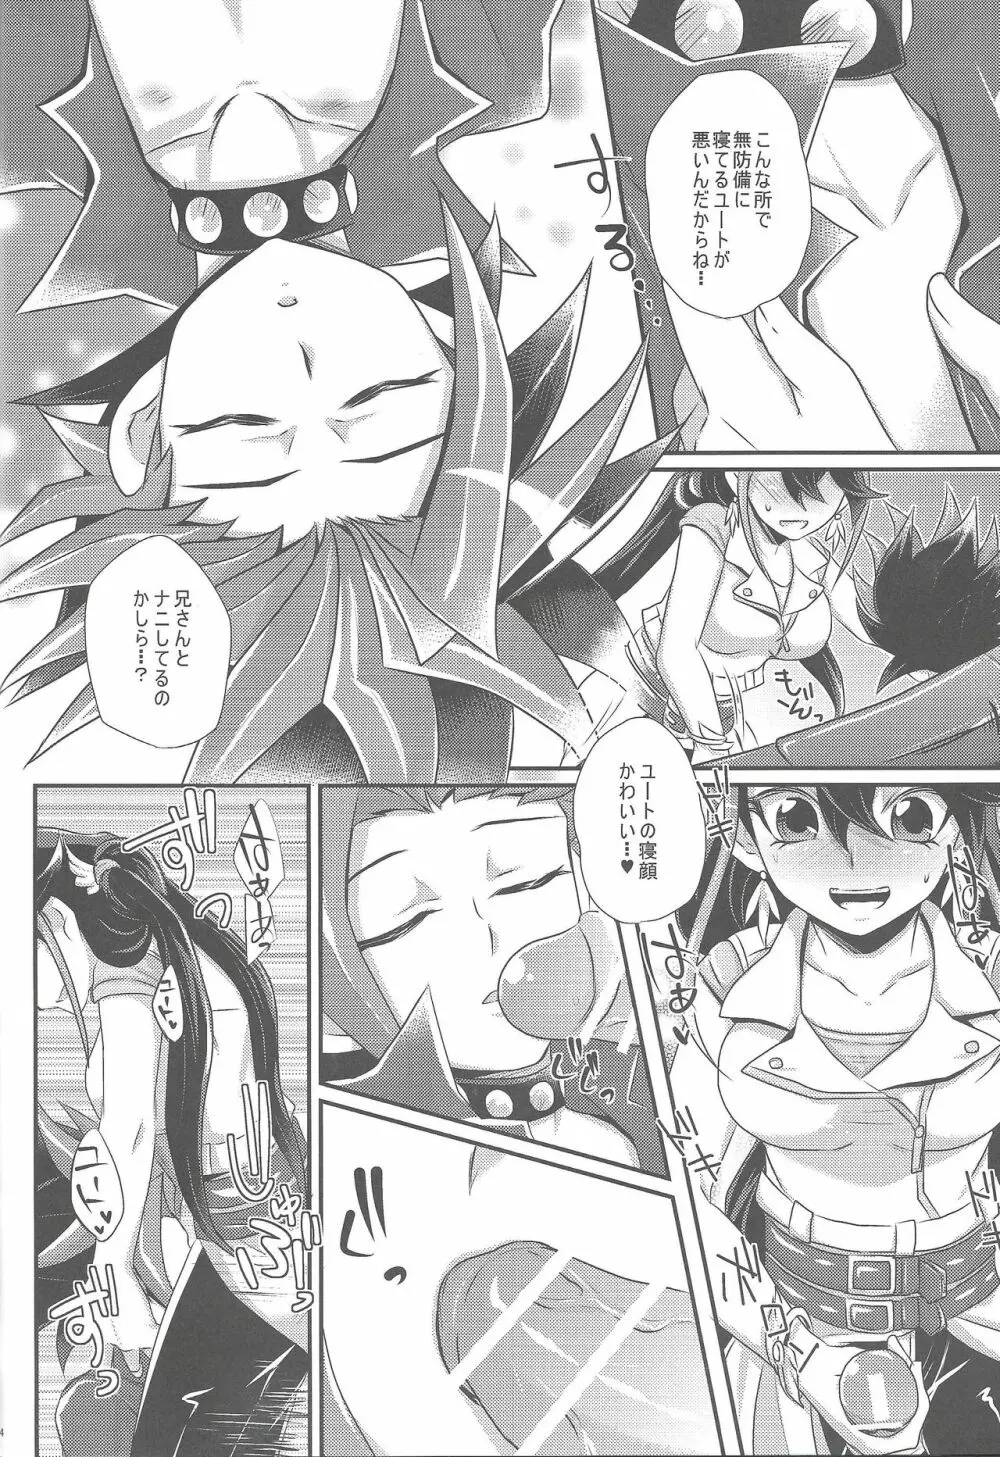 ACME of Smile! - page23